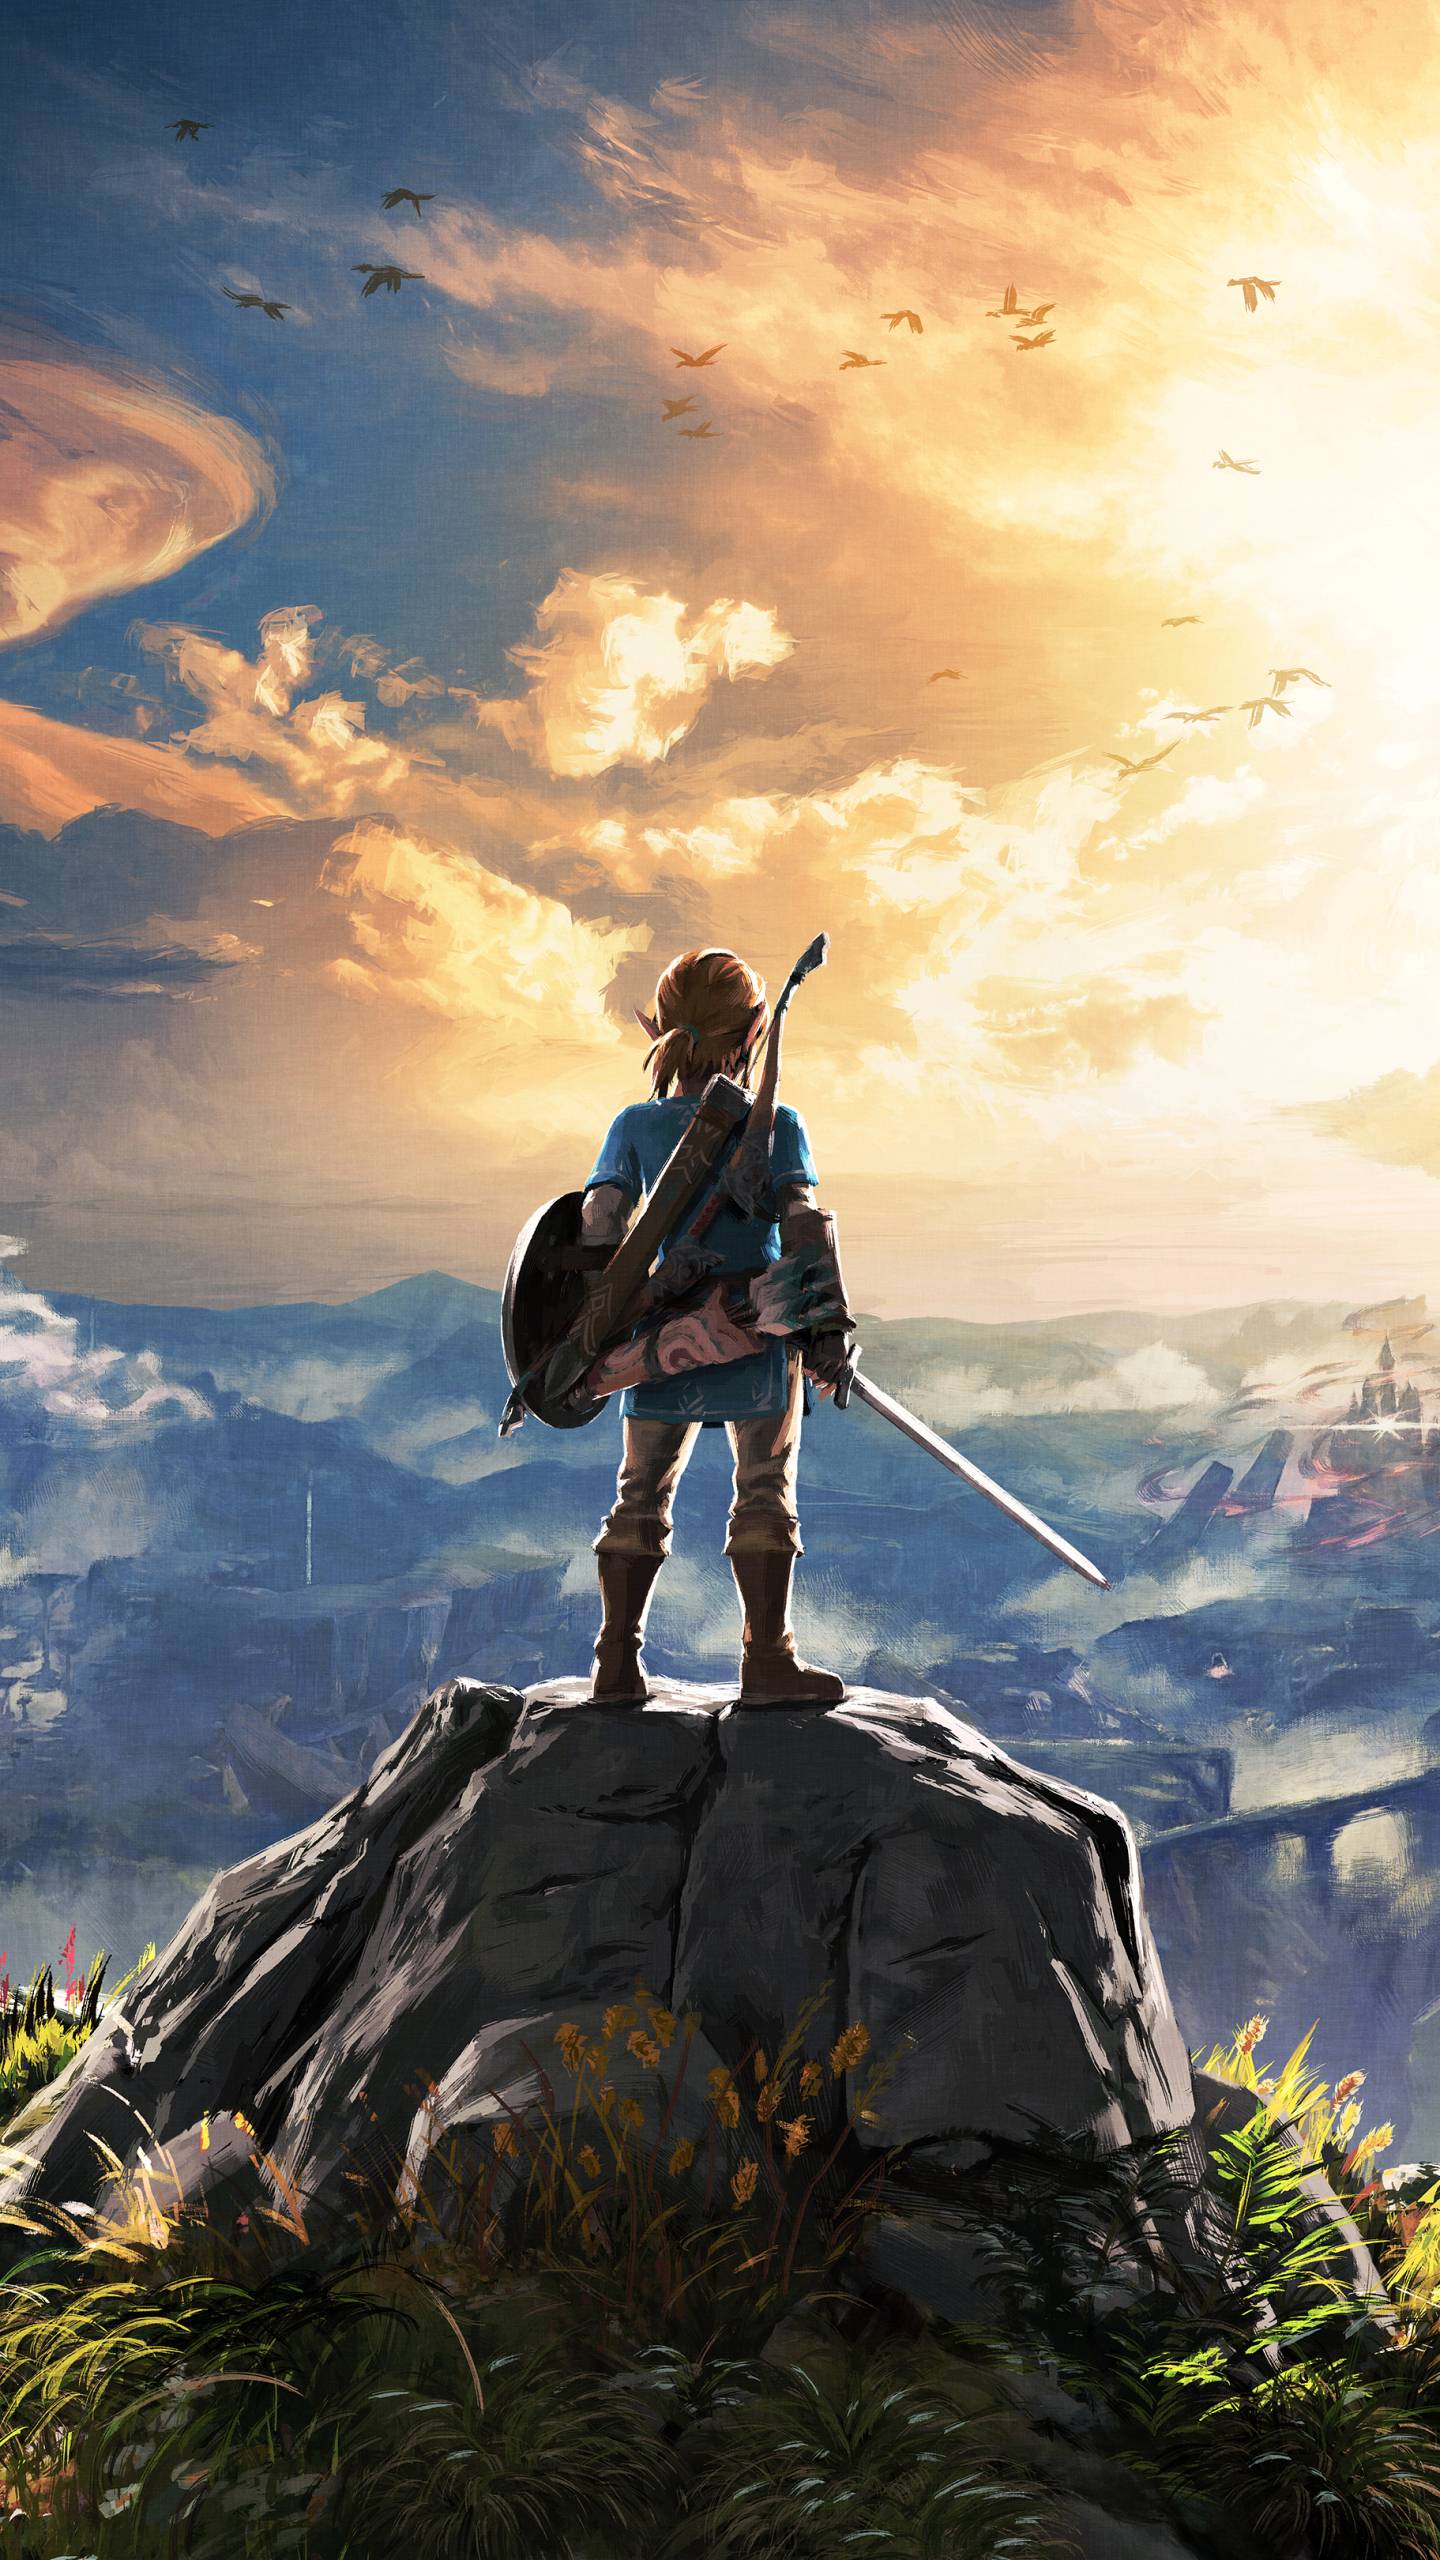 BoTW][Wallpaper] Is there a wallpaper like one of these but without